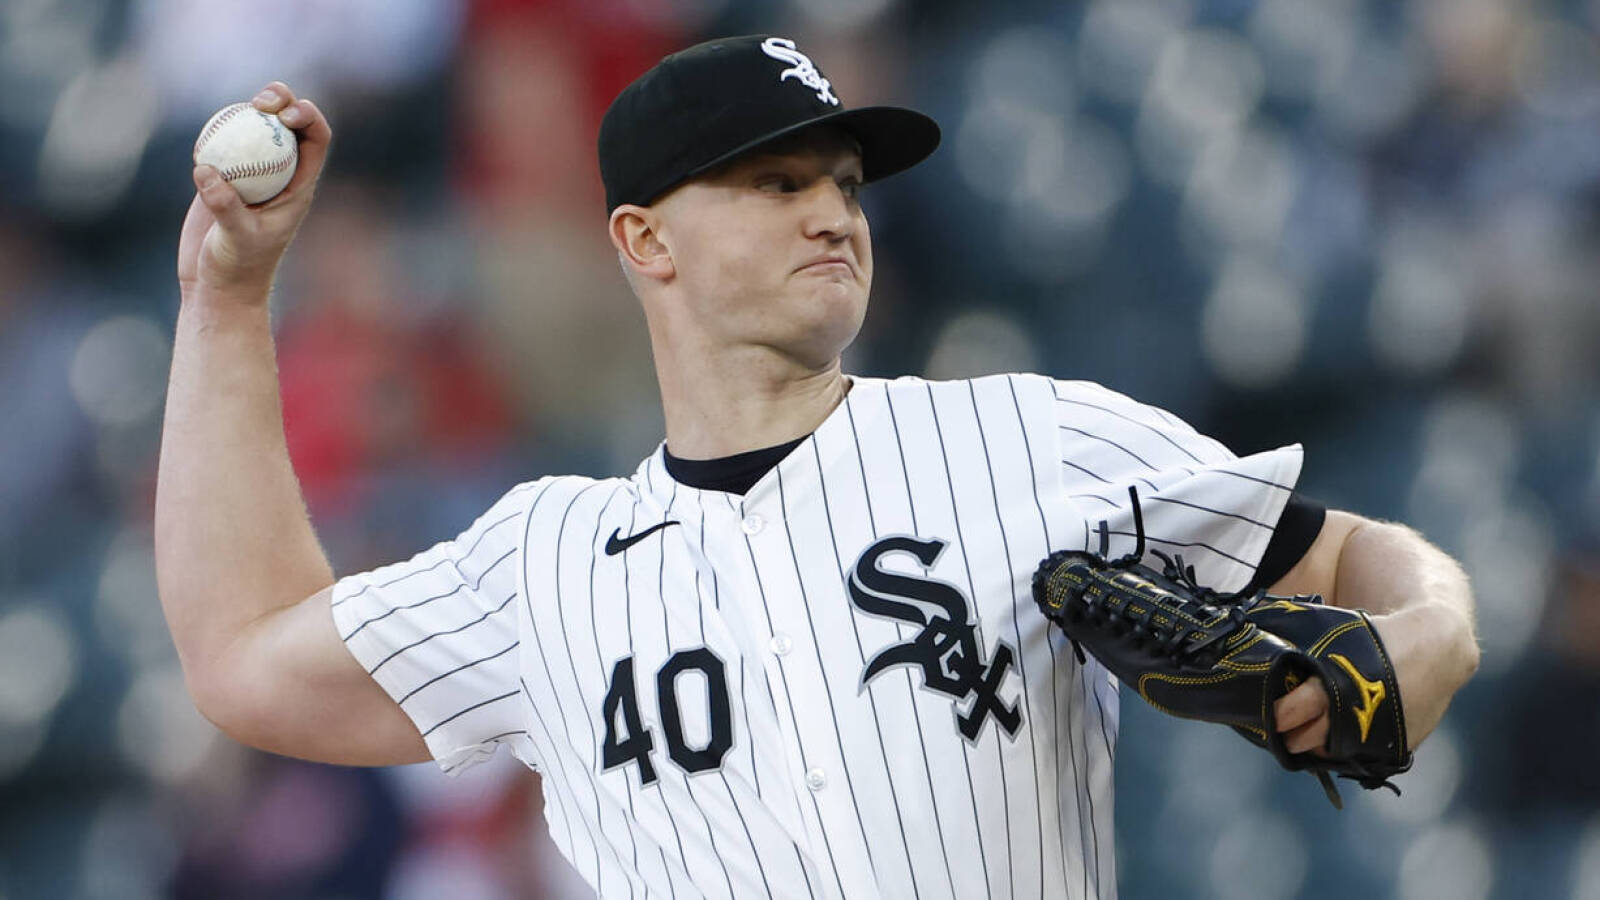 White Sox make pitching swap, move right-hander to bullpen